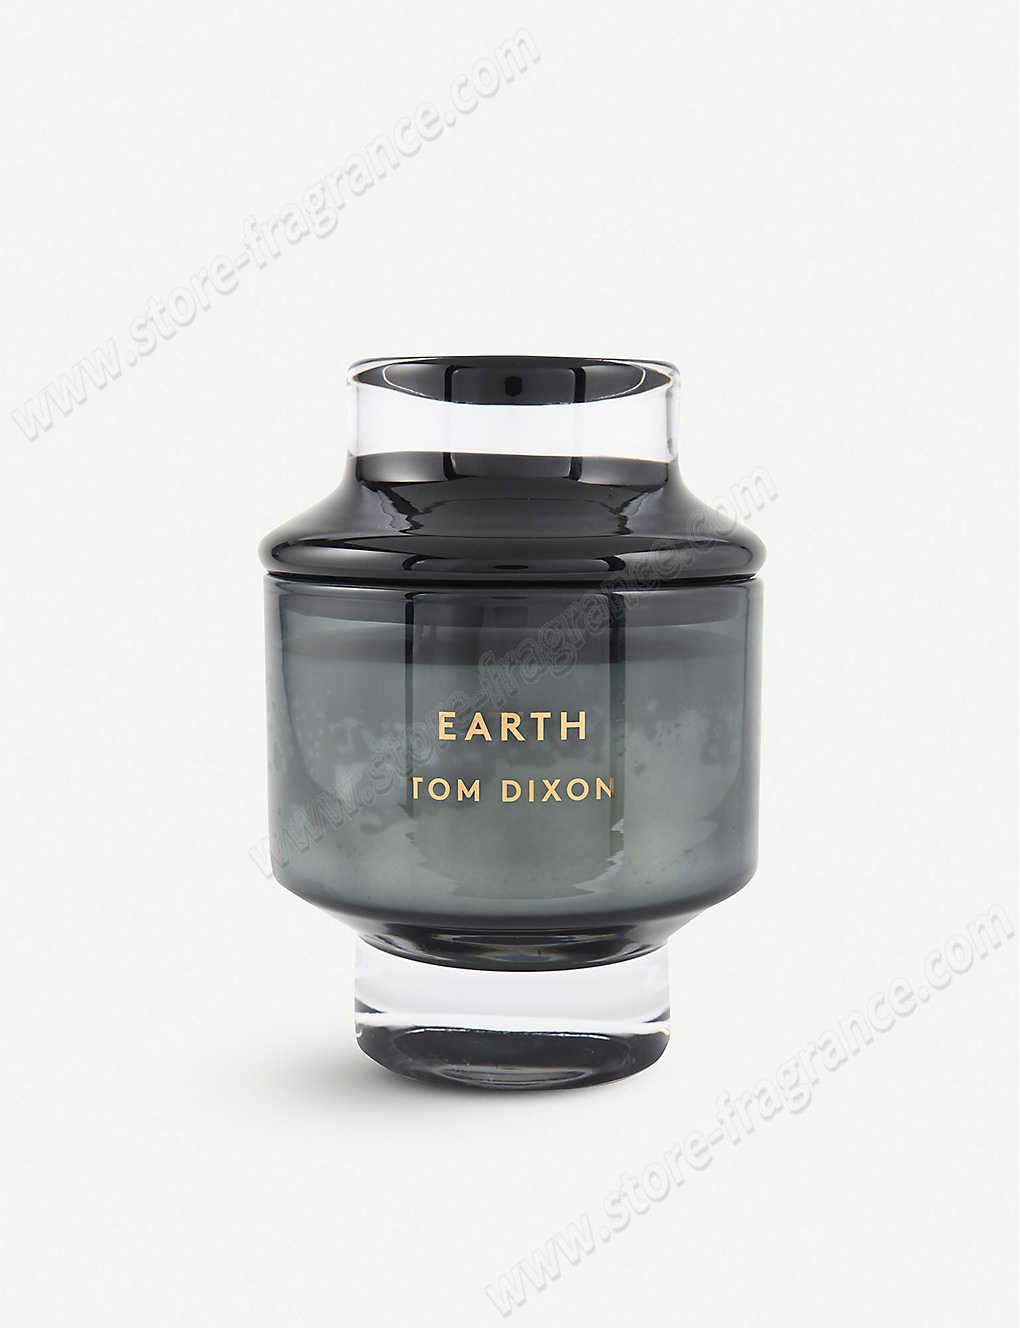 TOM DIXON/Scent Earth large candle ✿ Discount Store - TOM DIXON/Scent Earth large candle ✿ Discount Store